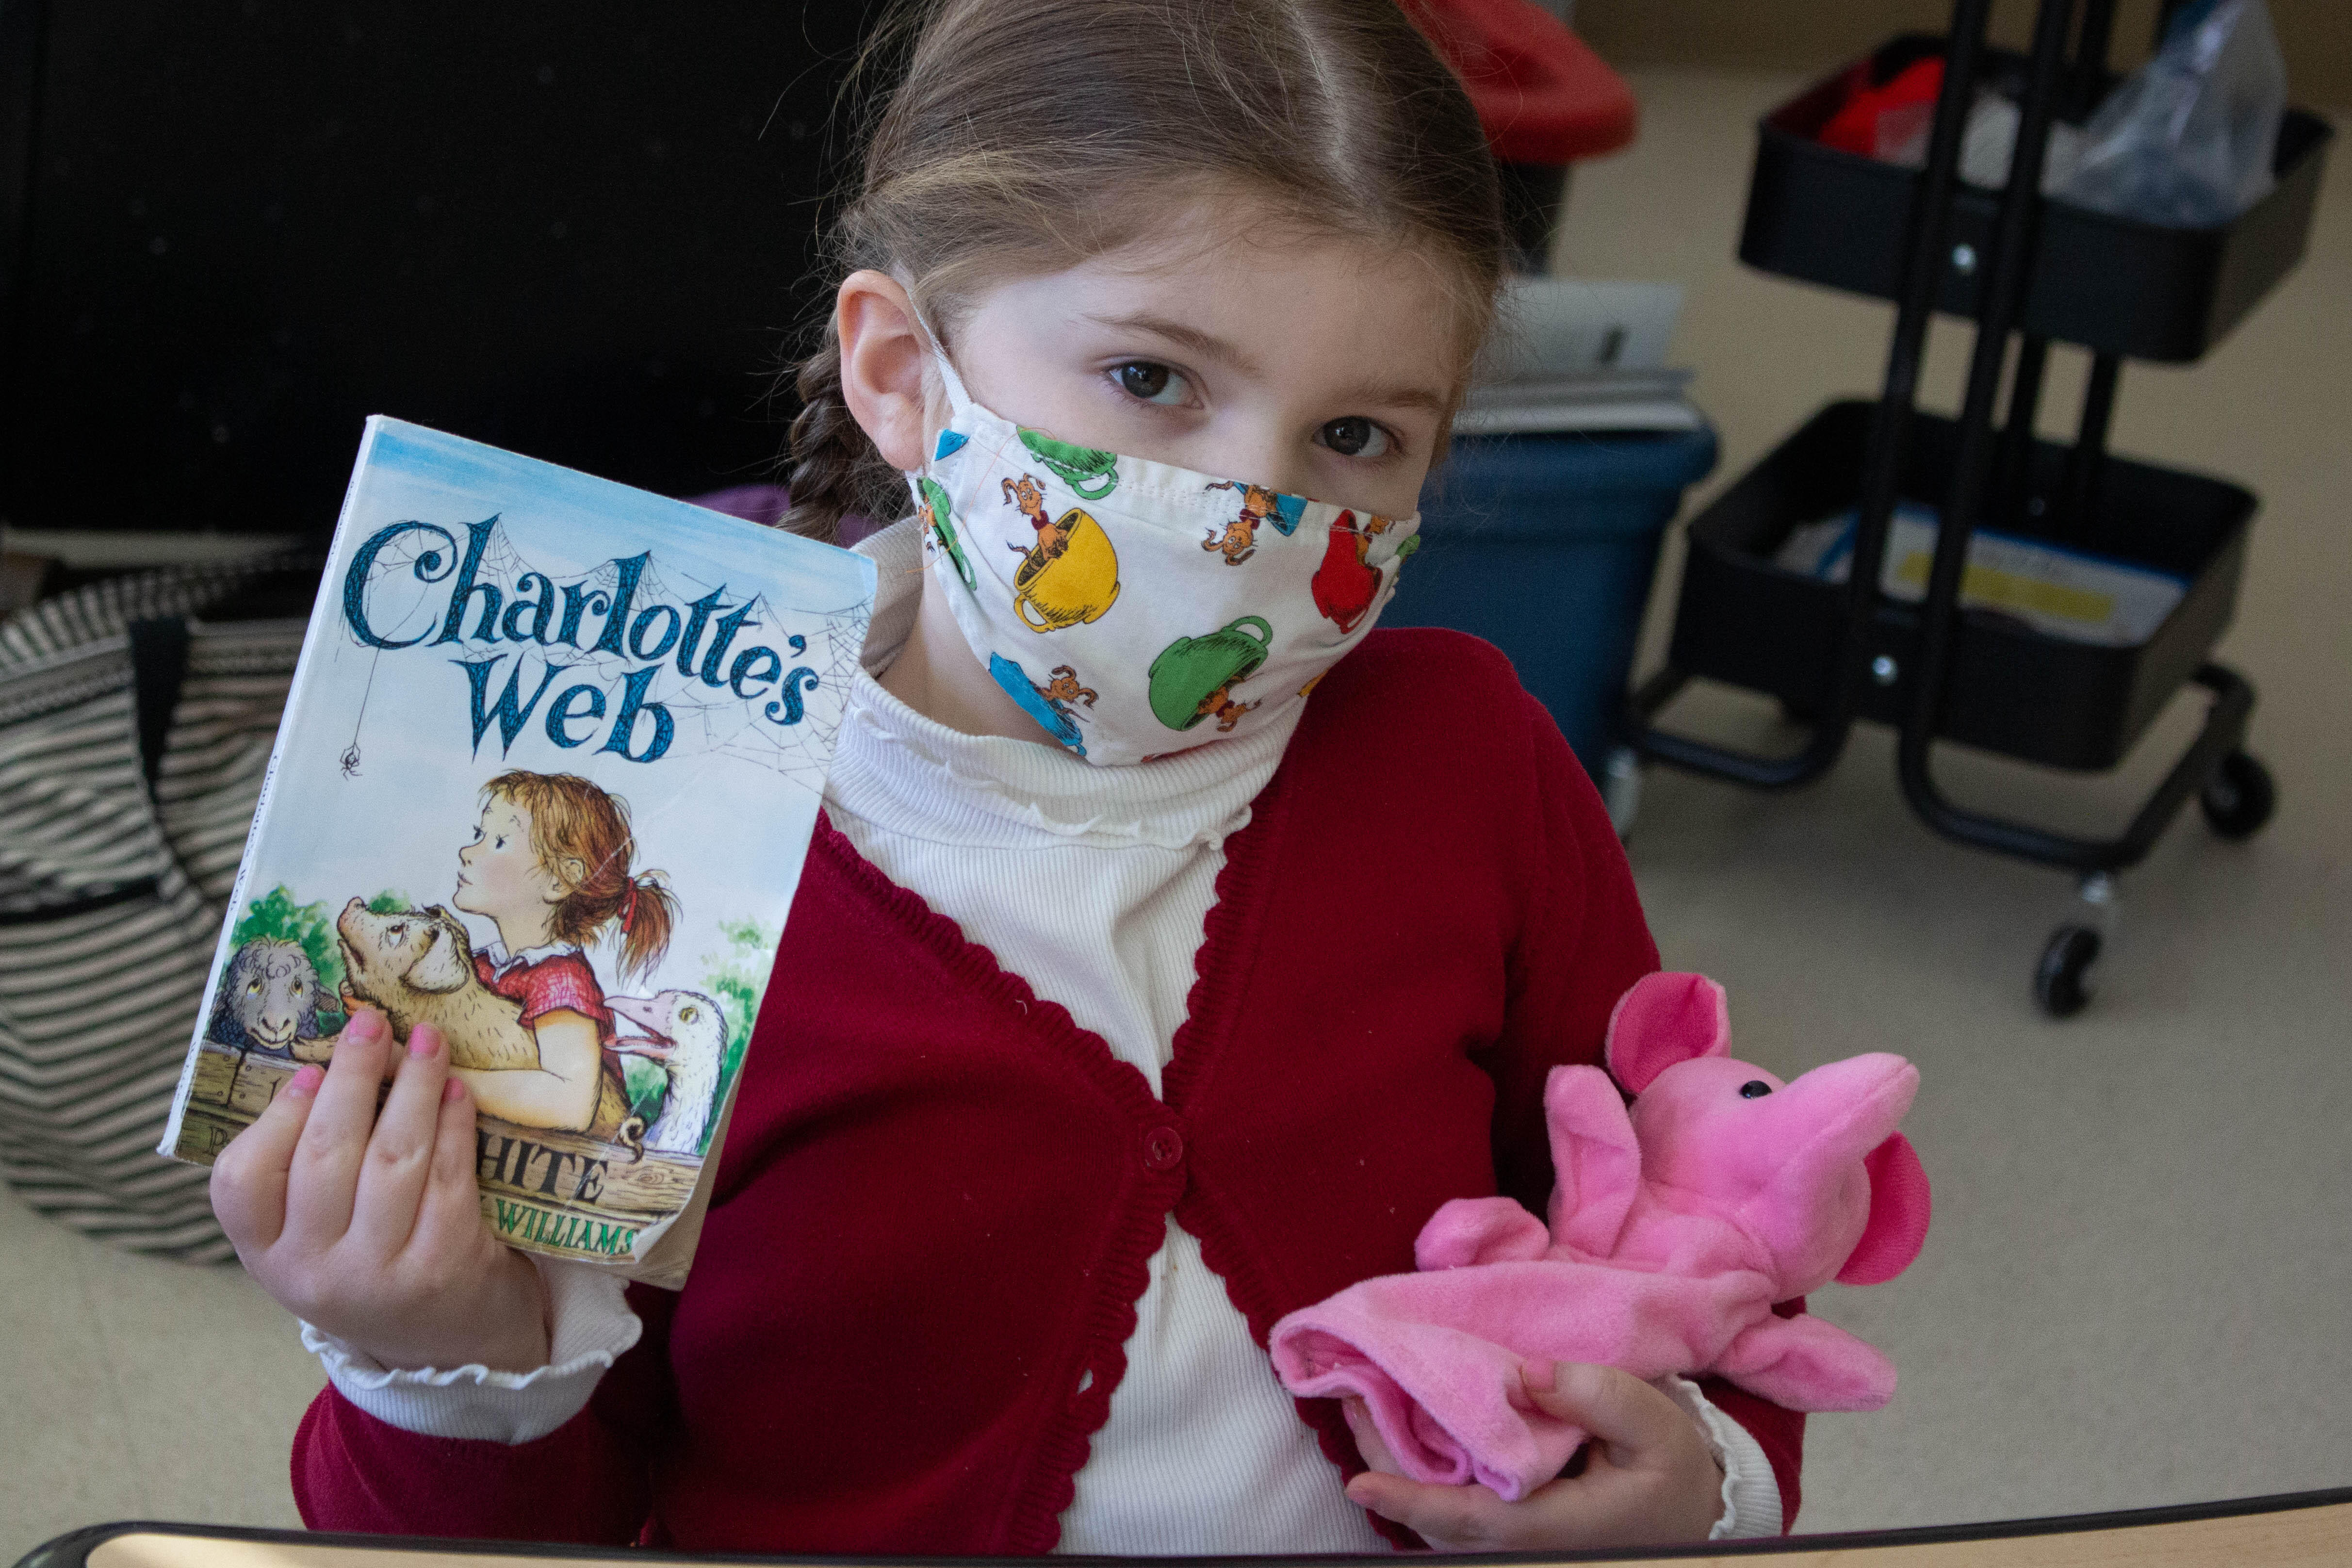 Student posing for a picture holding up a copy of Charlotte's Web and a toy pig